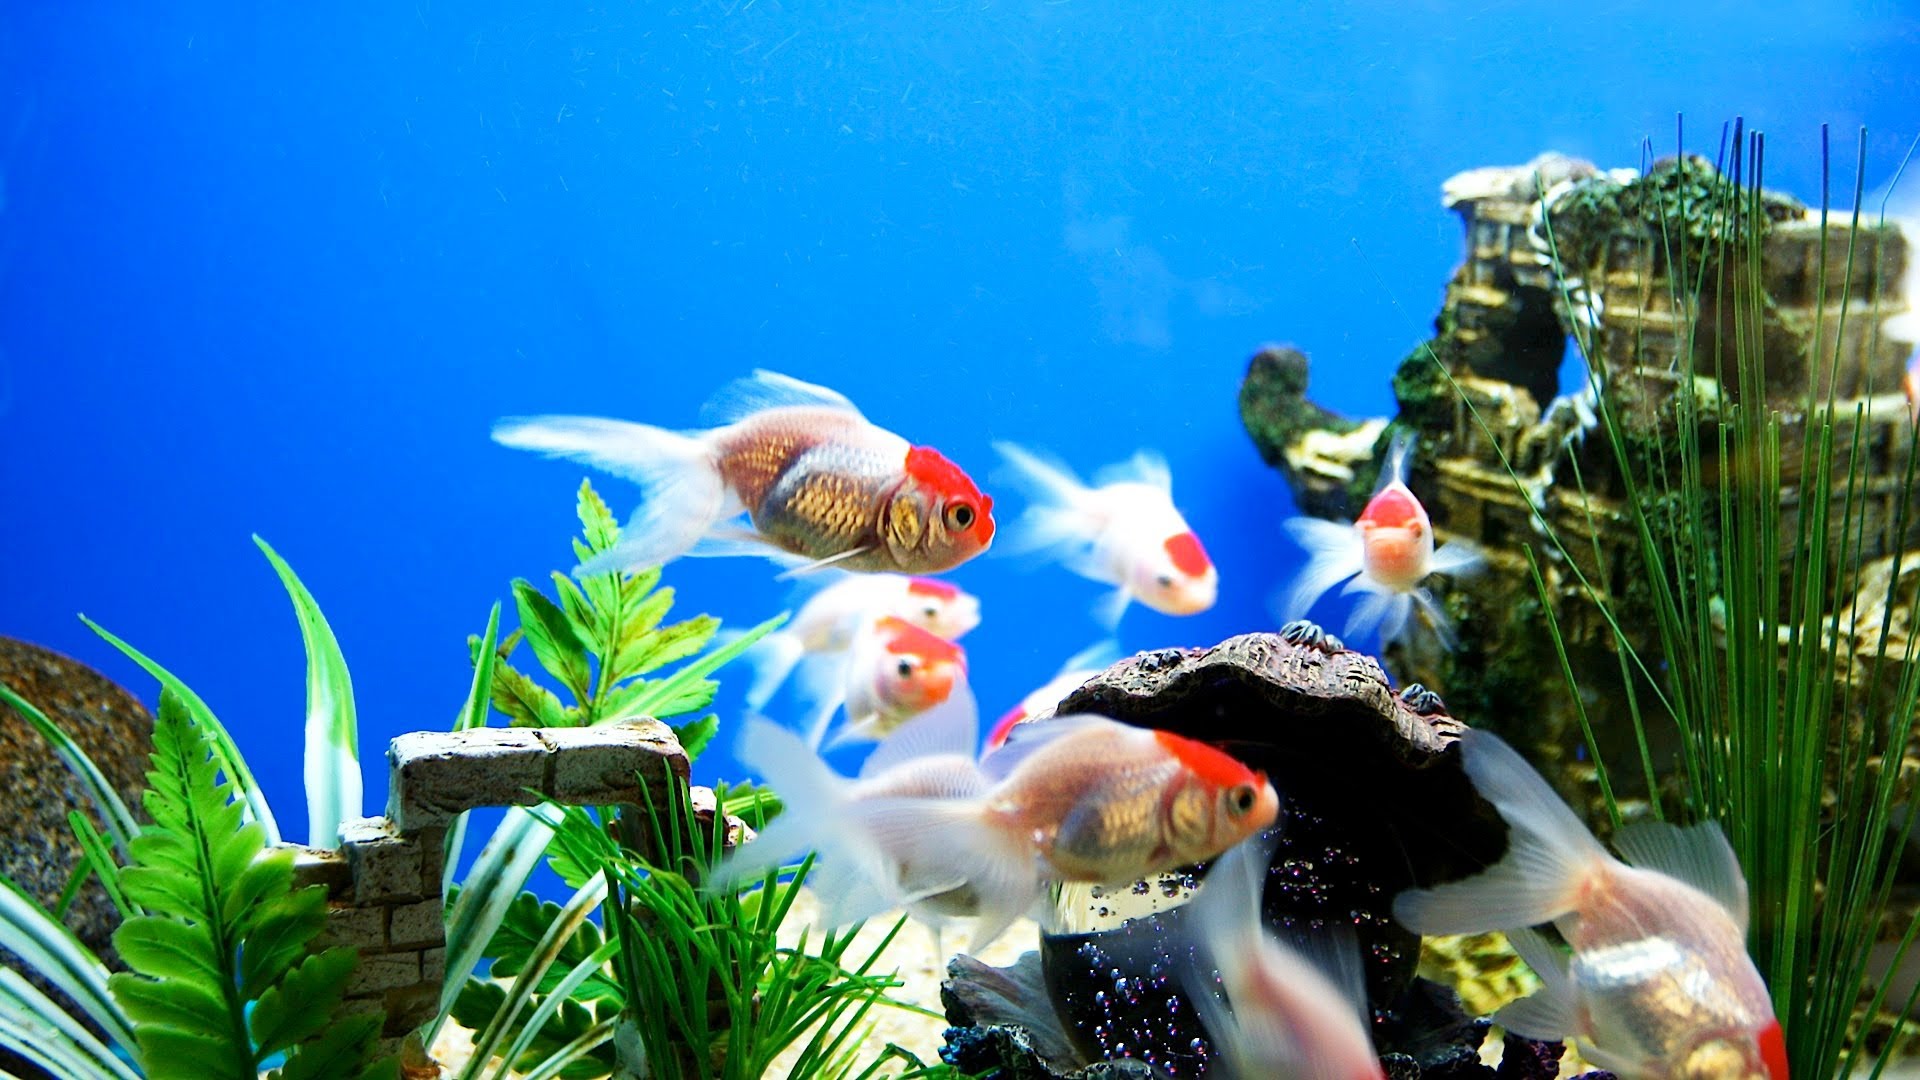 Simple Vastu Tips for Keeping an Aquarium in Your Home